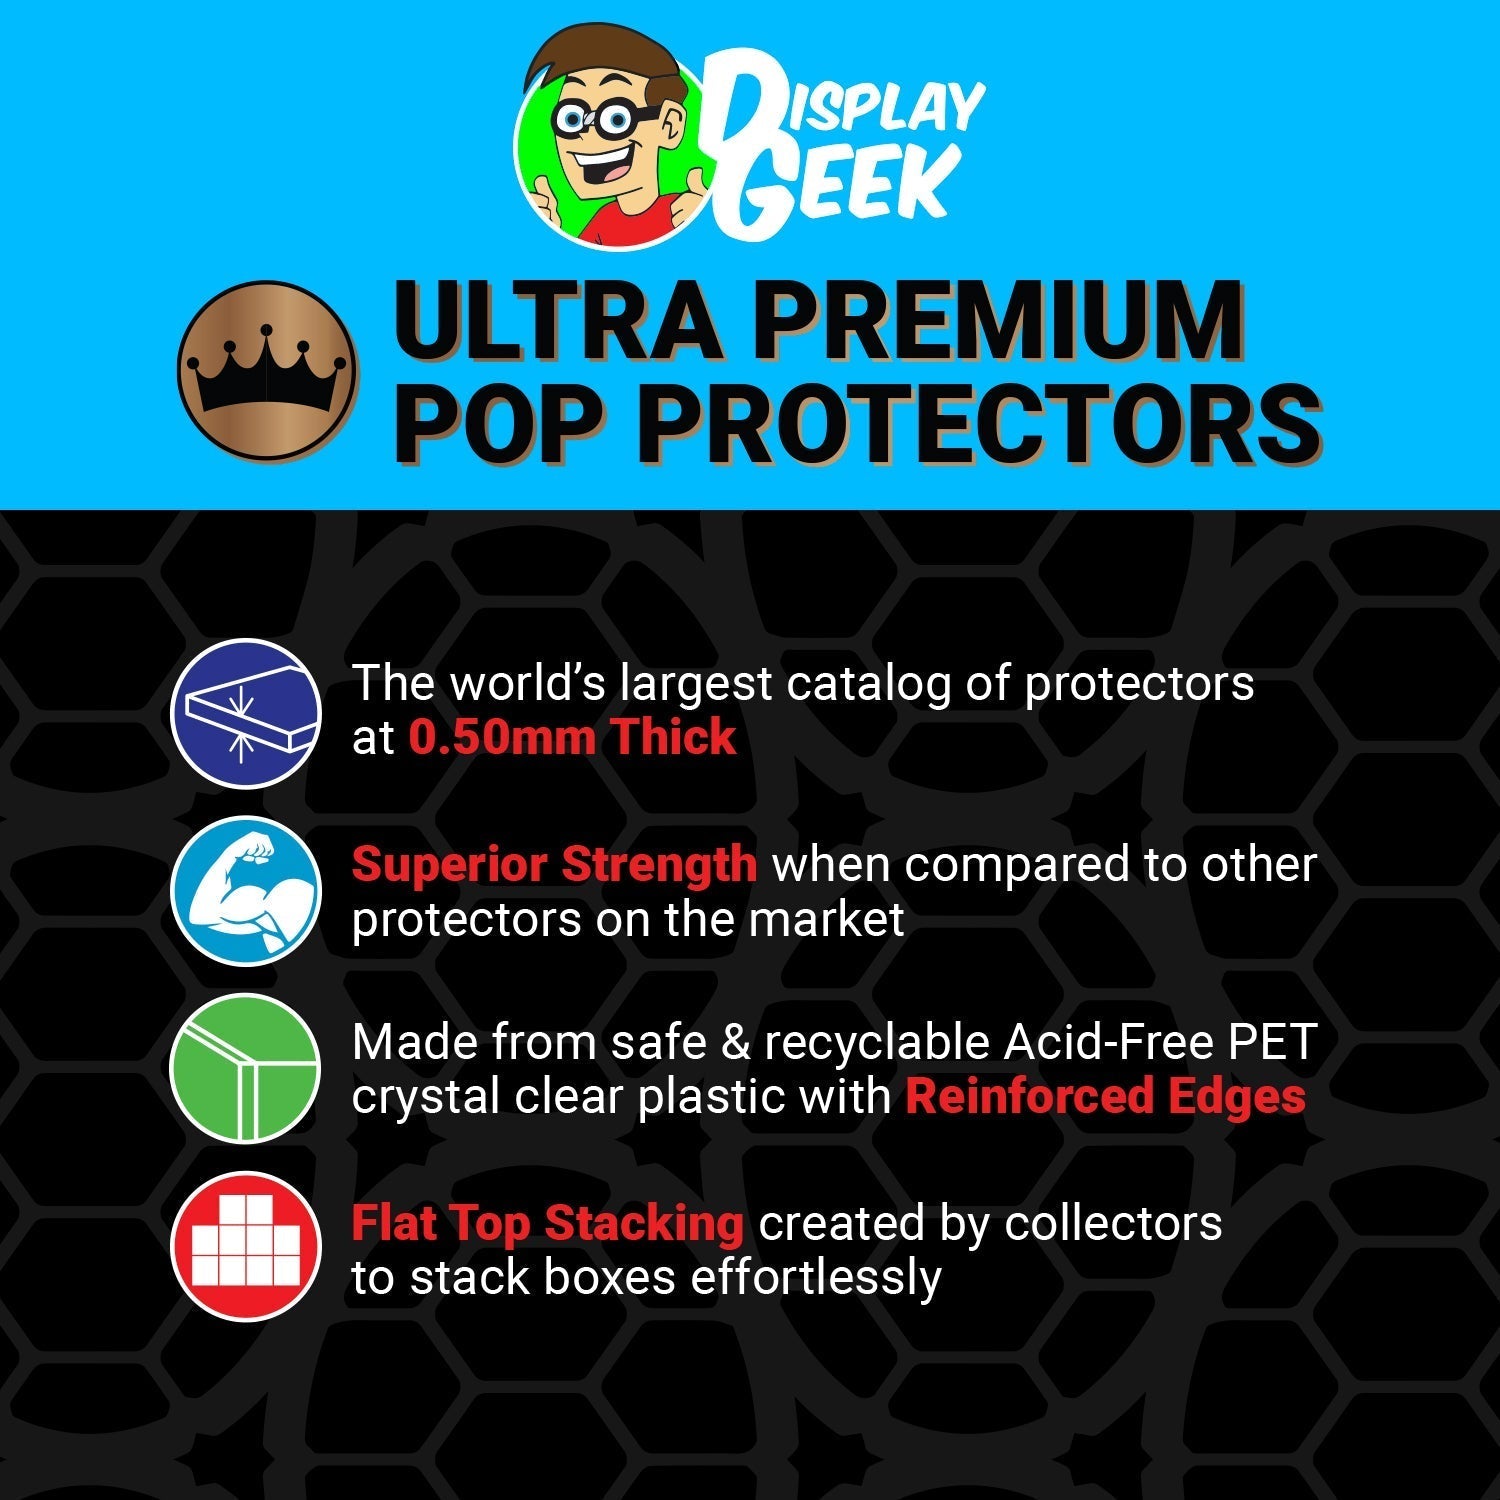 Pop Protector for All Might Funko Pop Pez - PPG Pop Protector Guide Search Created by Display Geek